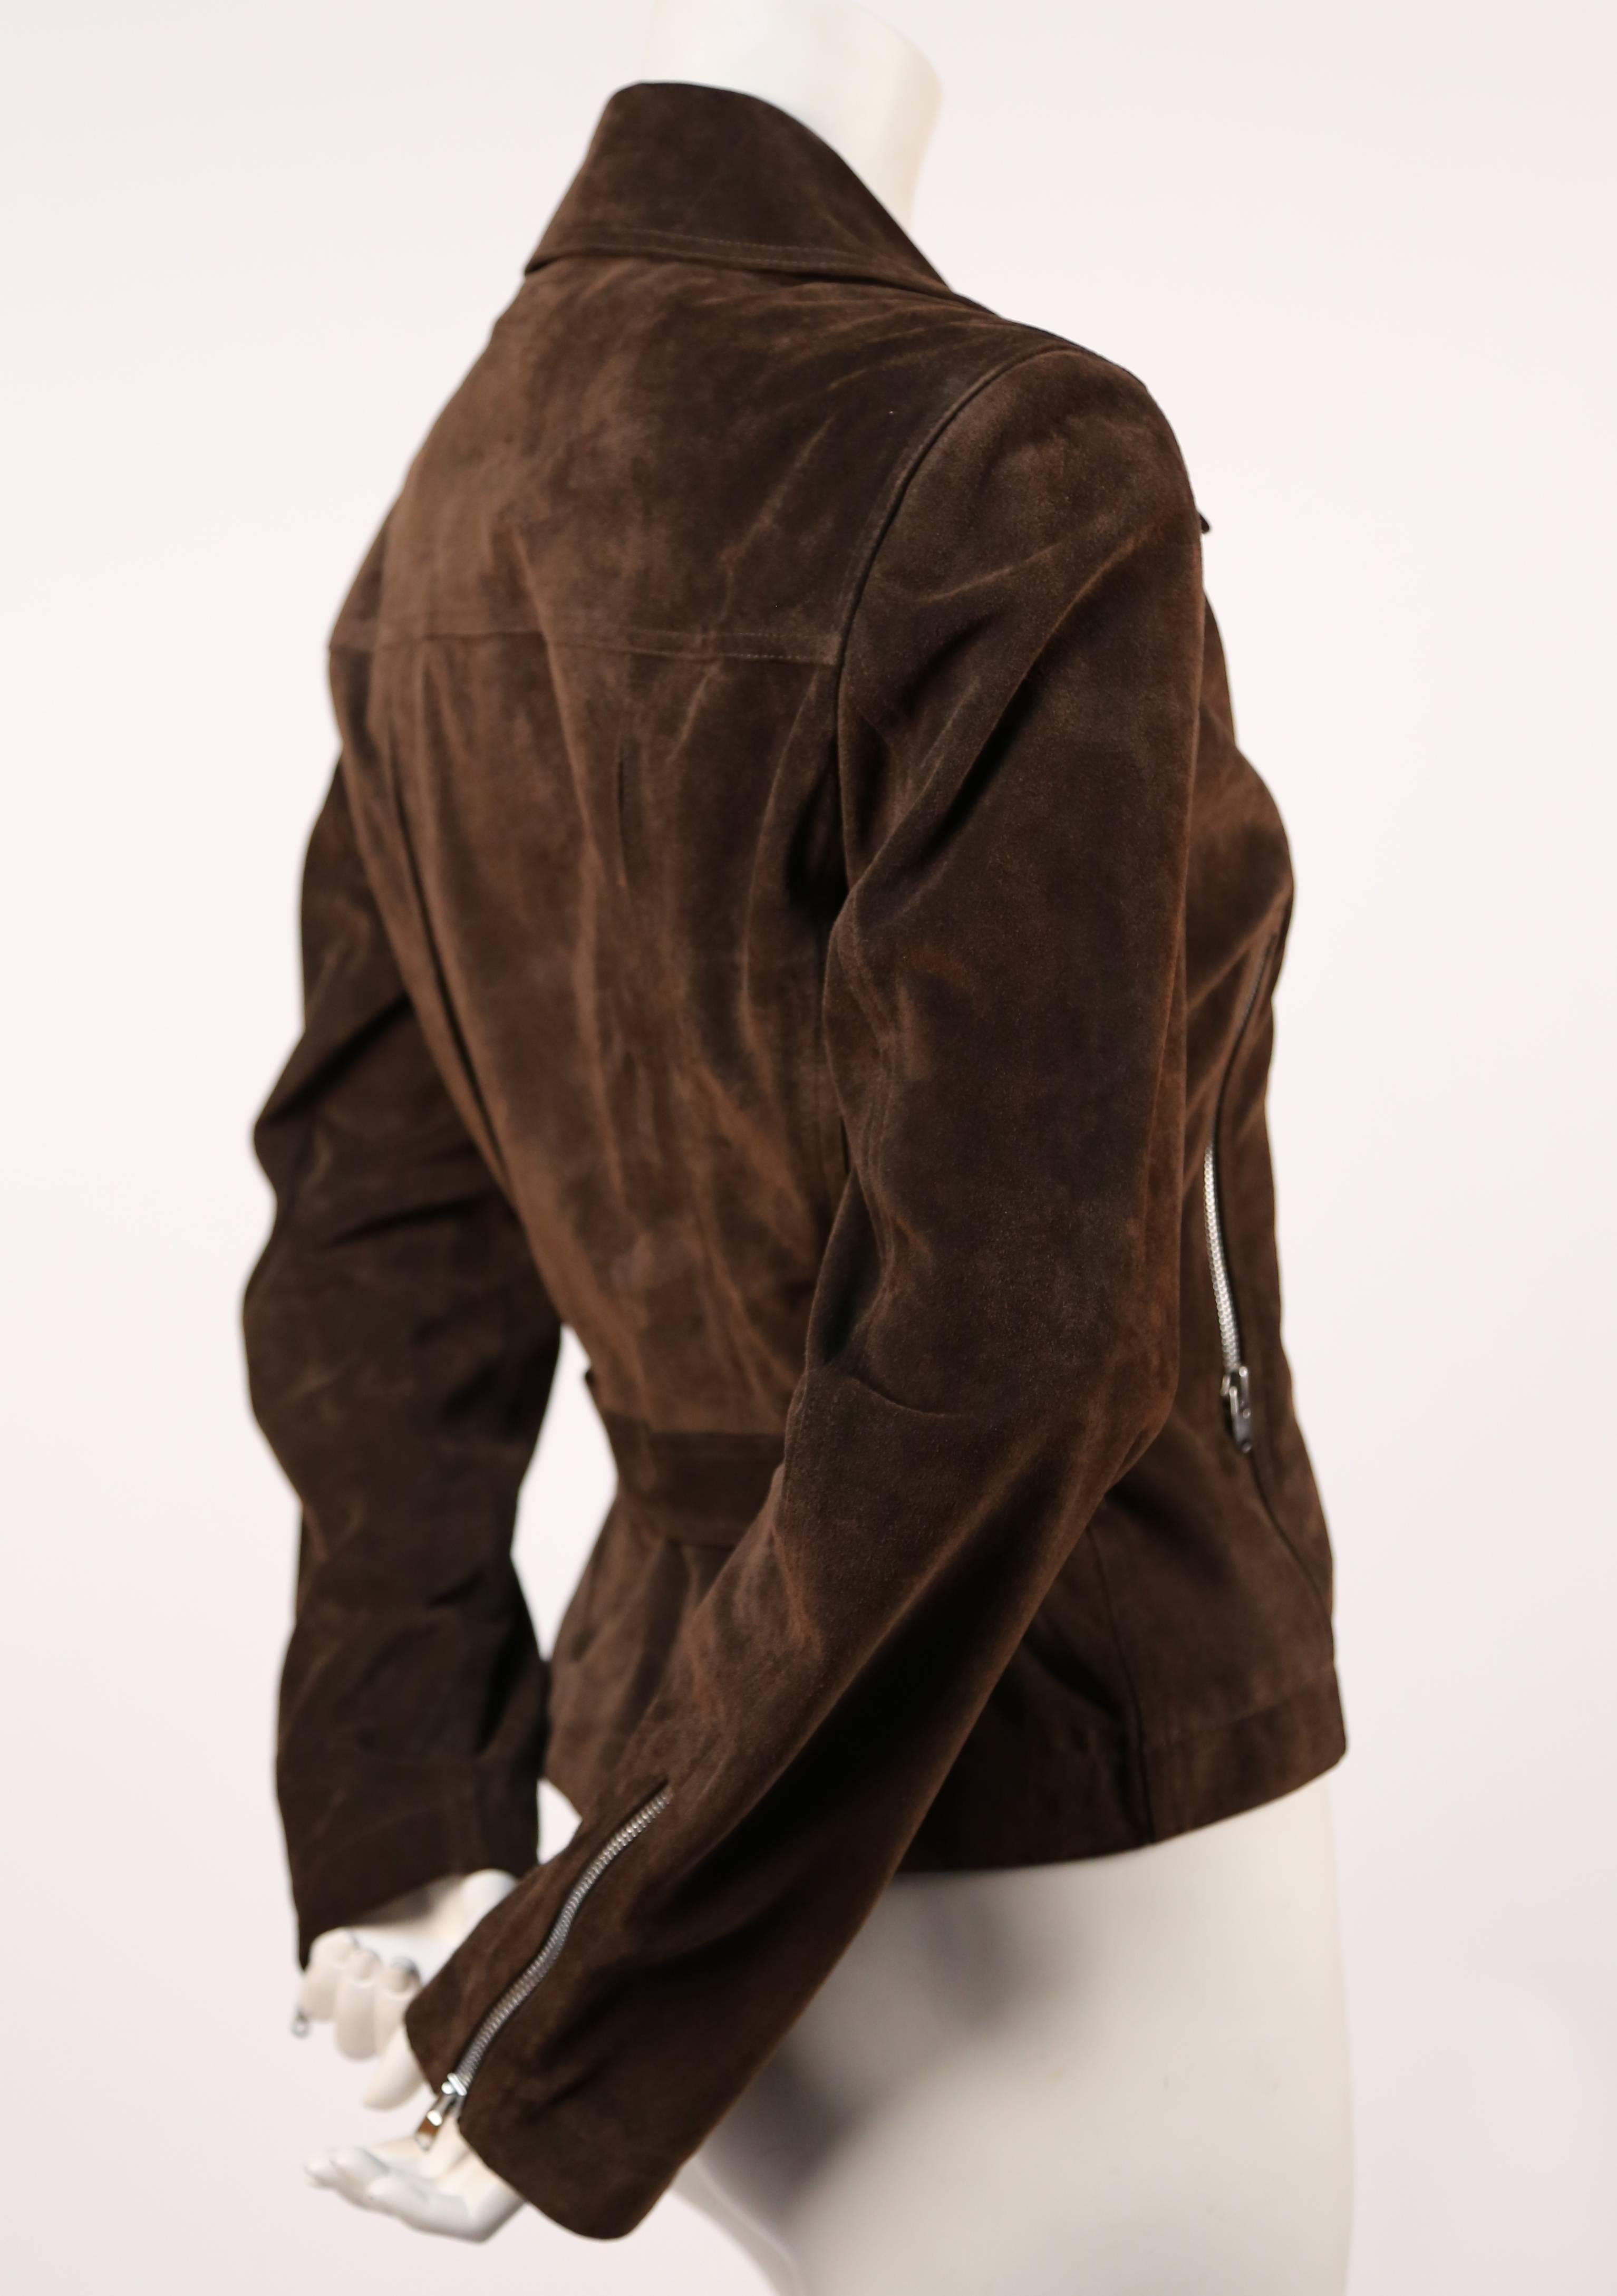 Rich chocolate brown suede motorcycle jacket with silver hardware and lace up detail at back from Azzedine Alaia. French size 40, although this jacket runs small and would best fit a FR 38. Approximate measurements: shoulders 15.5